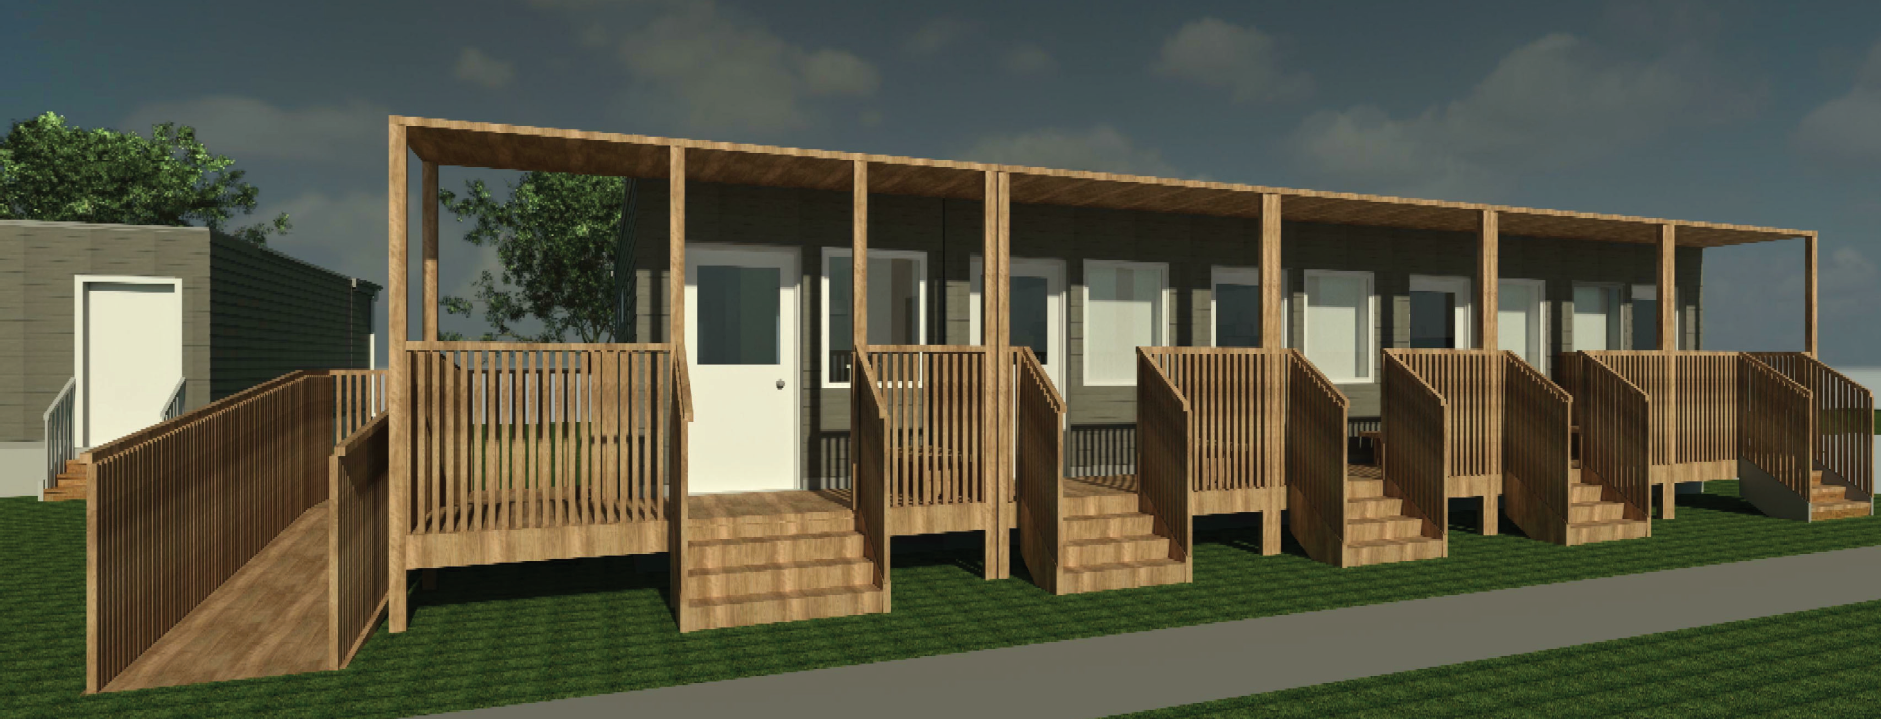 Conceptual drawing of the outside of the micro-homes (attached homes with porches)